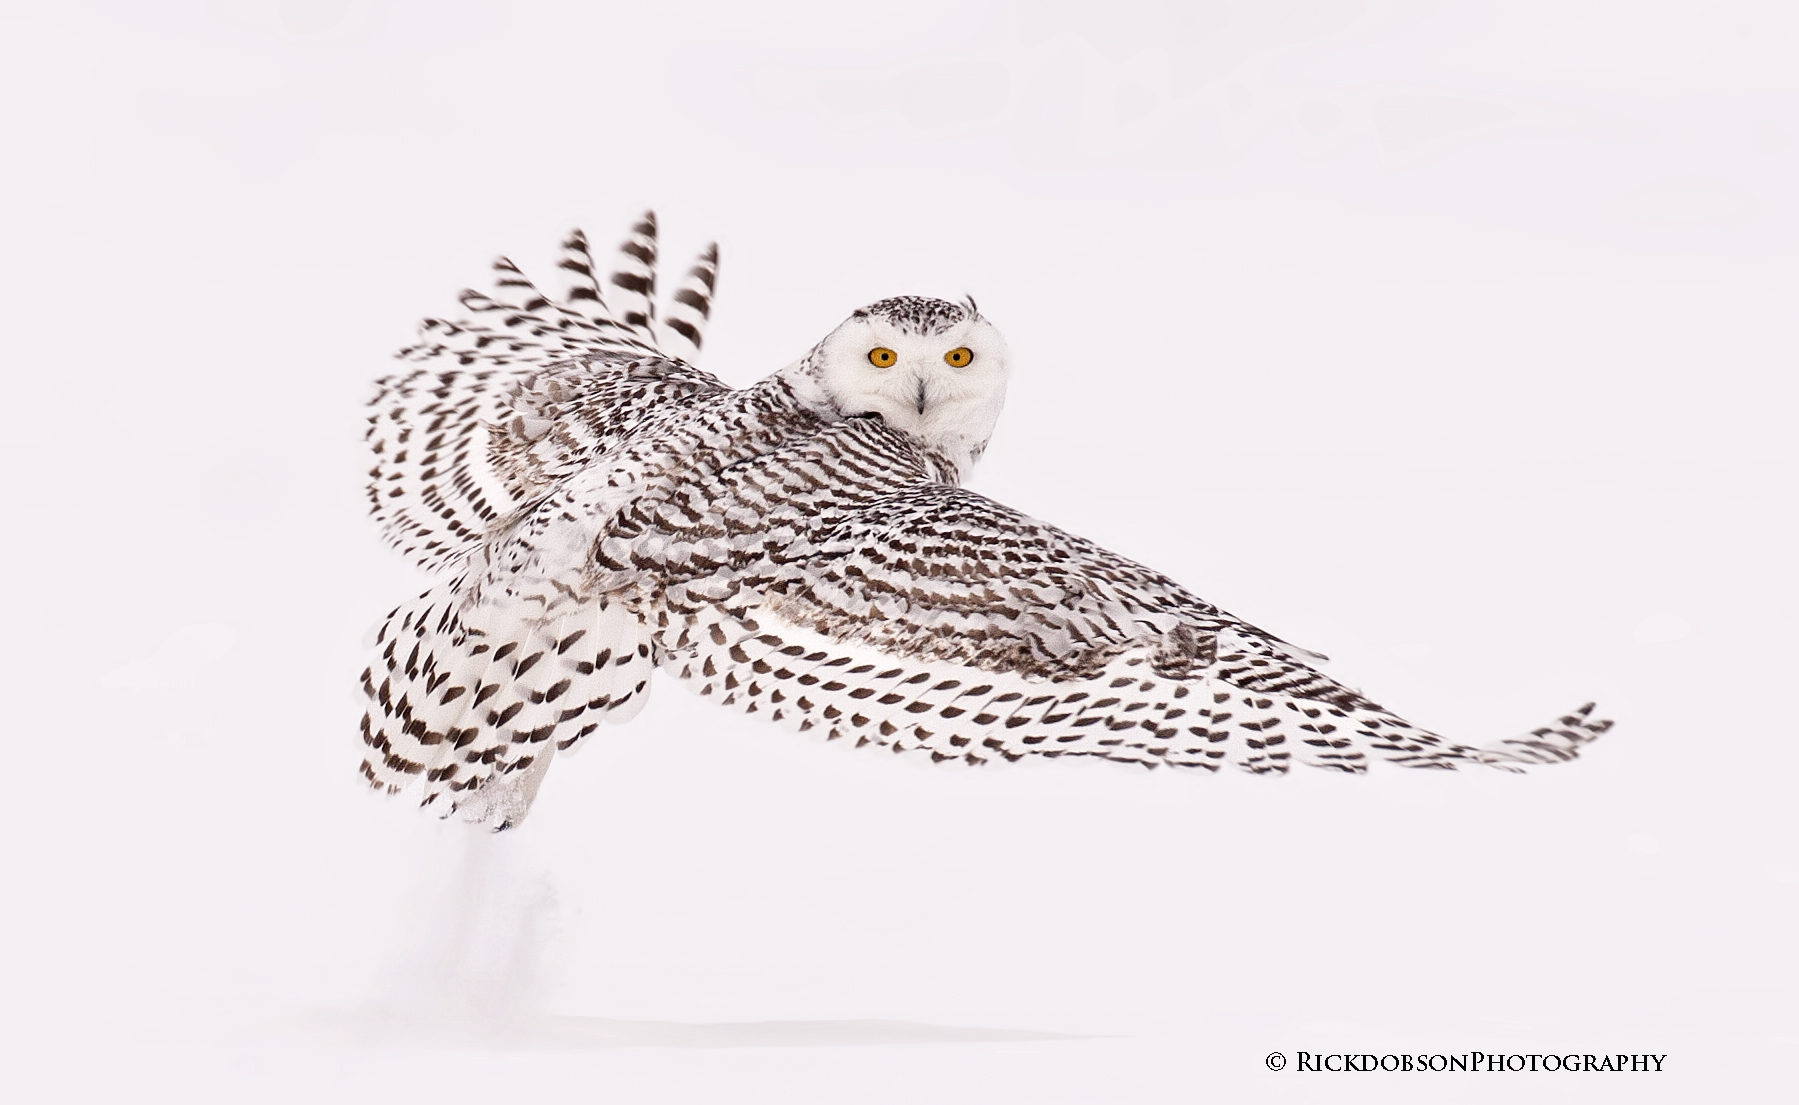 Snowy Owl Photography Workshop Images